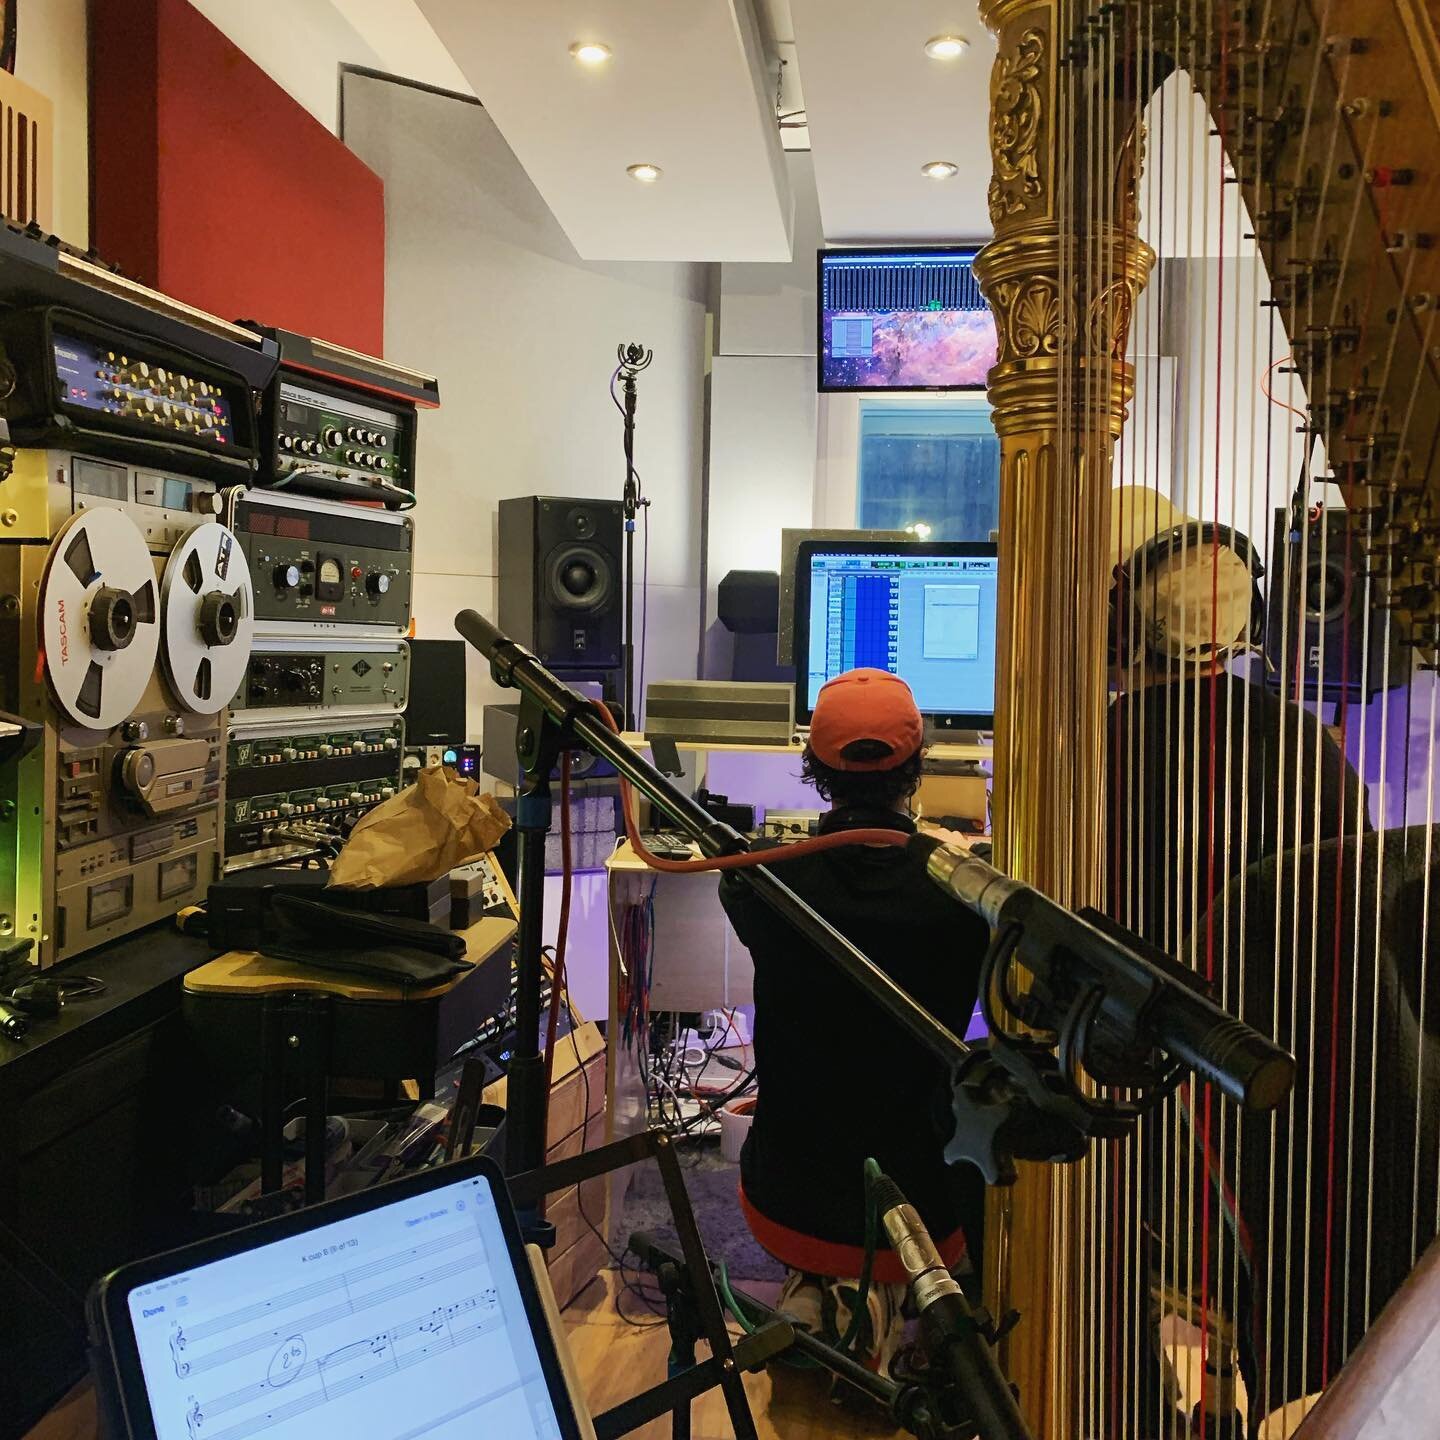 #tbt had the best time recording some harp for @chrishyson a few months ago! forgot to post this cause I had a 40 degree fever on the day and was delirious. shout out to @ricola @tylenol for getting me through the session.